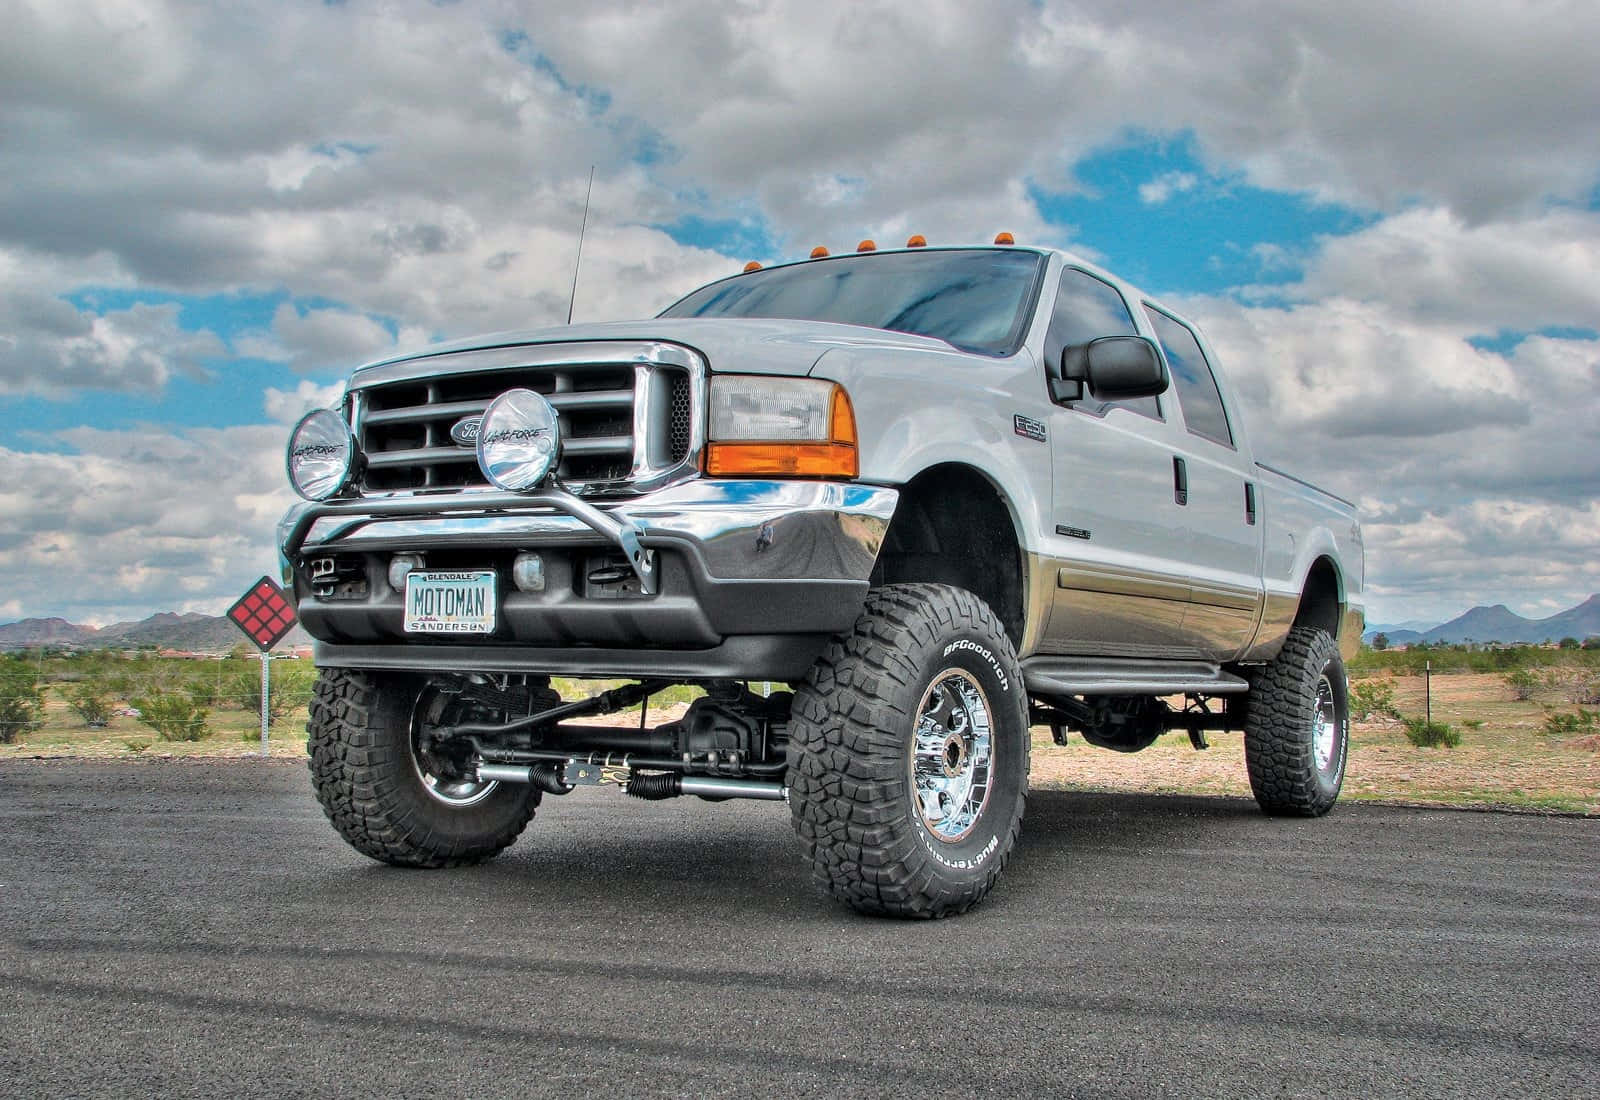 Ford Powerstroke - Power and Dependability in a Tidy Package Wallpaper